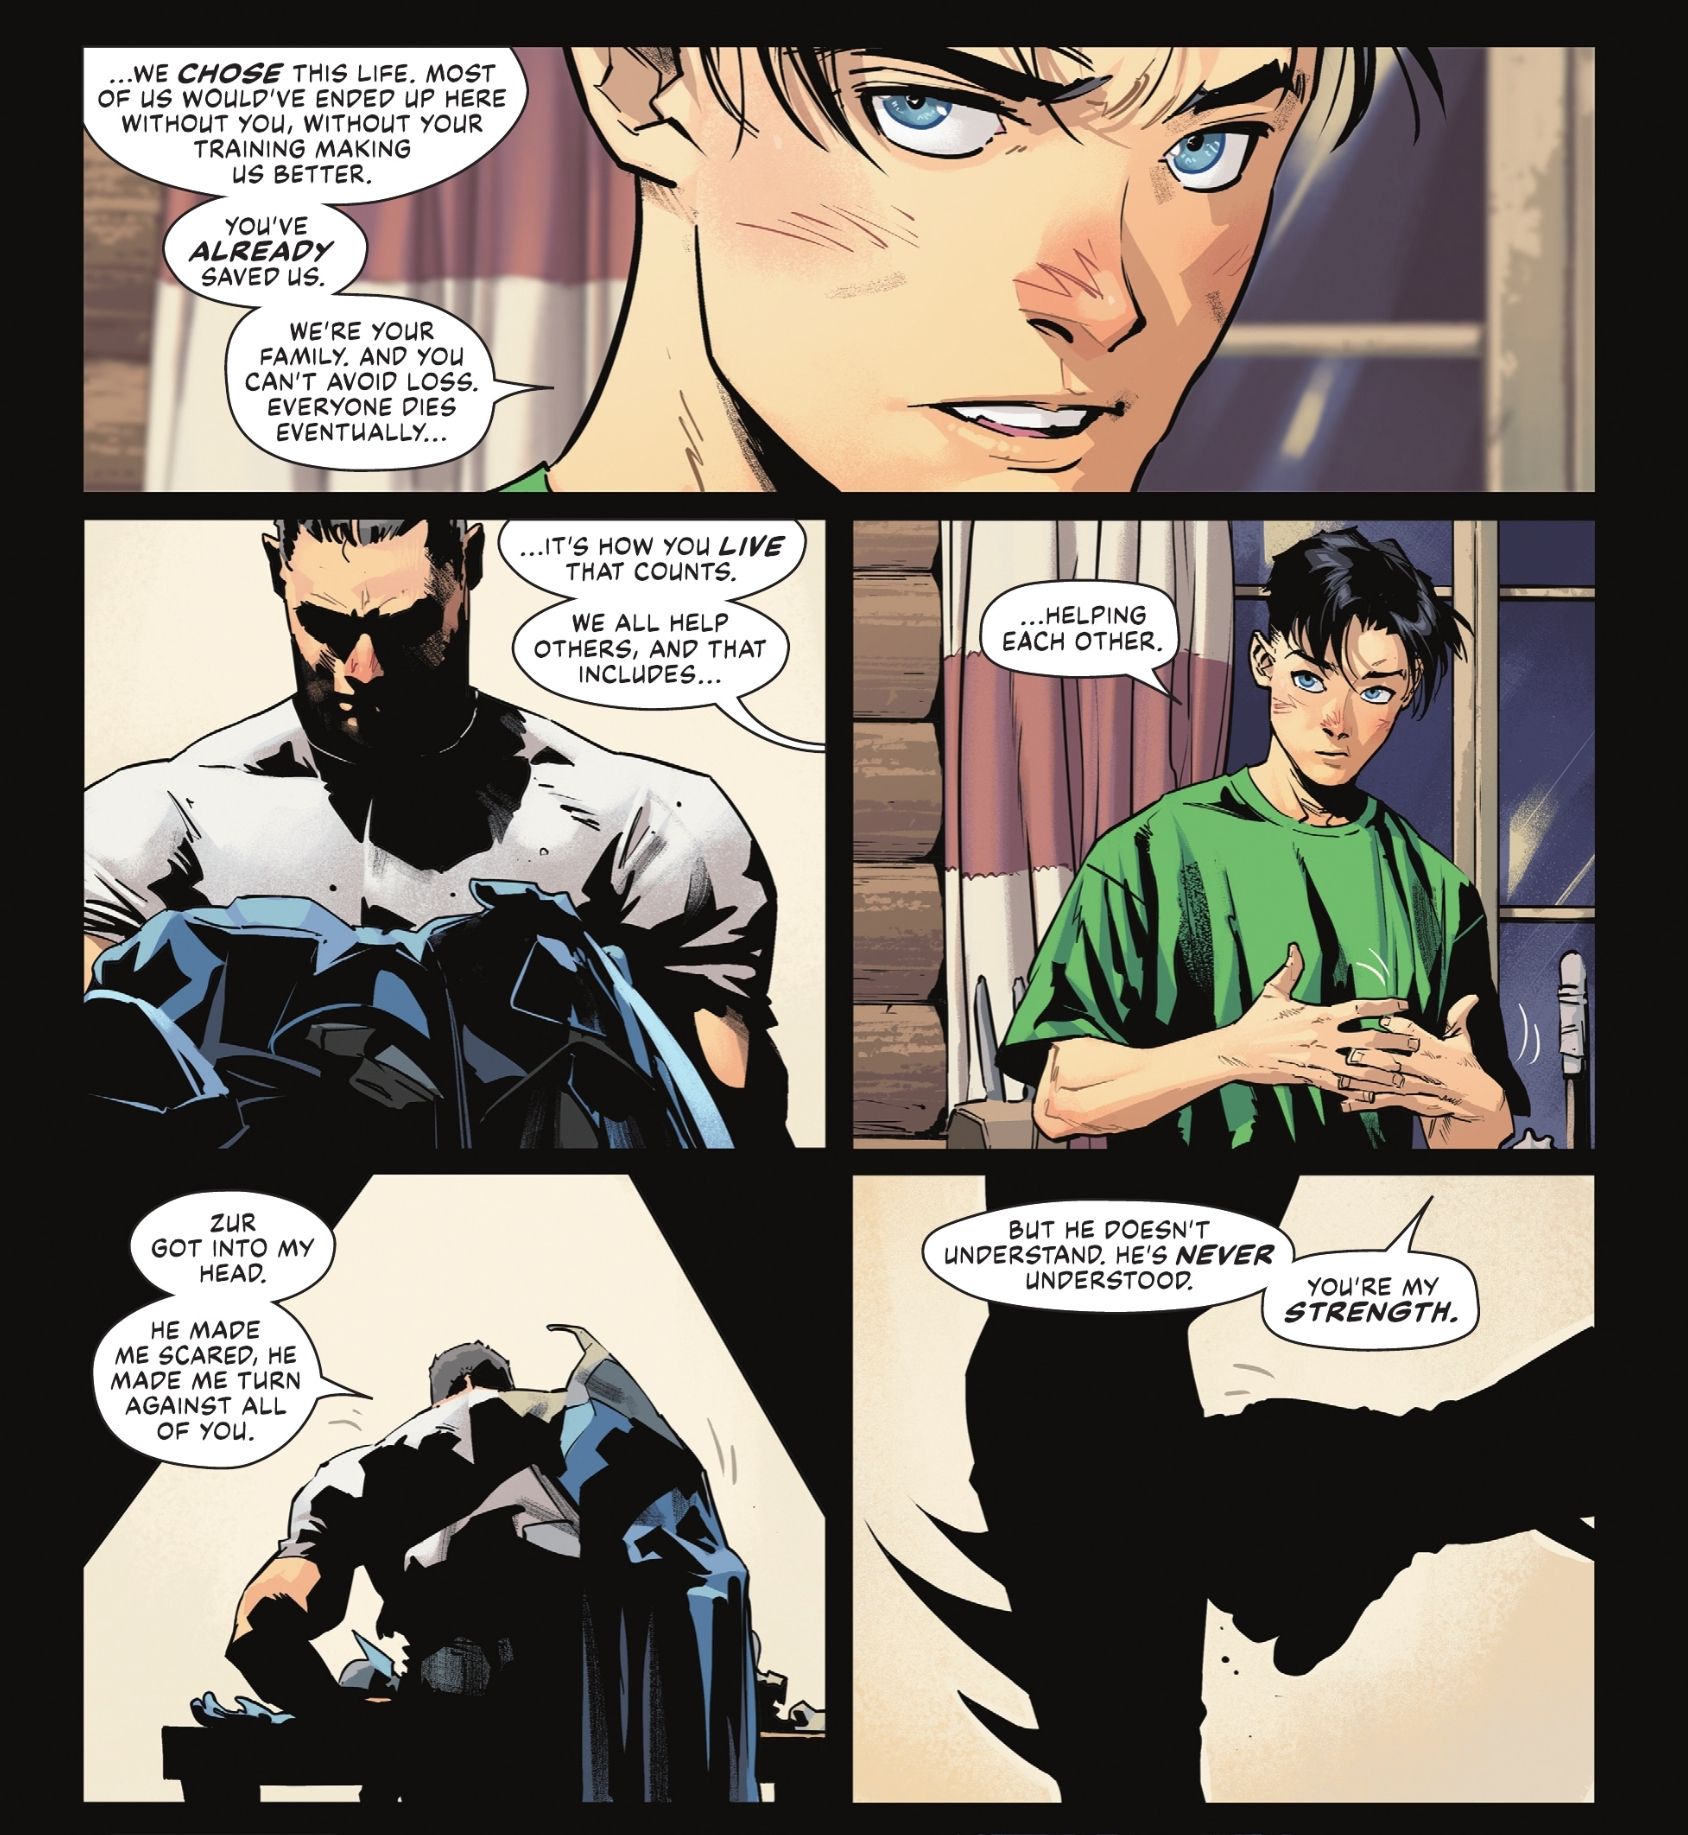 Tim reminds Batman that his family is there to support and help him.